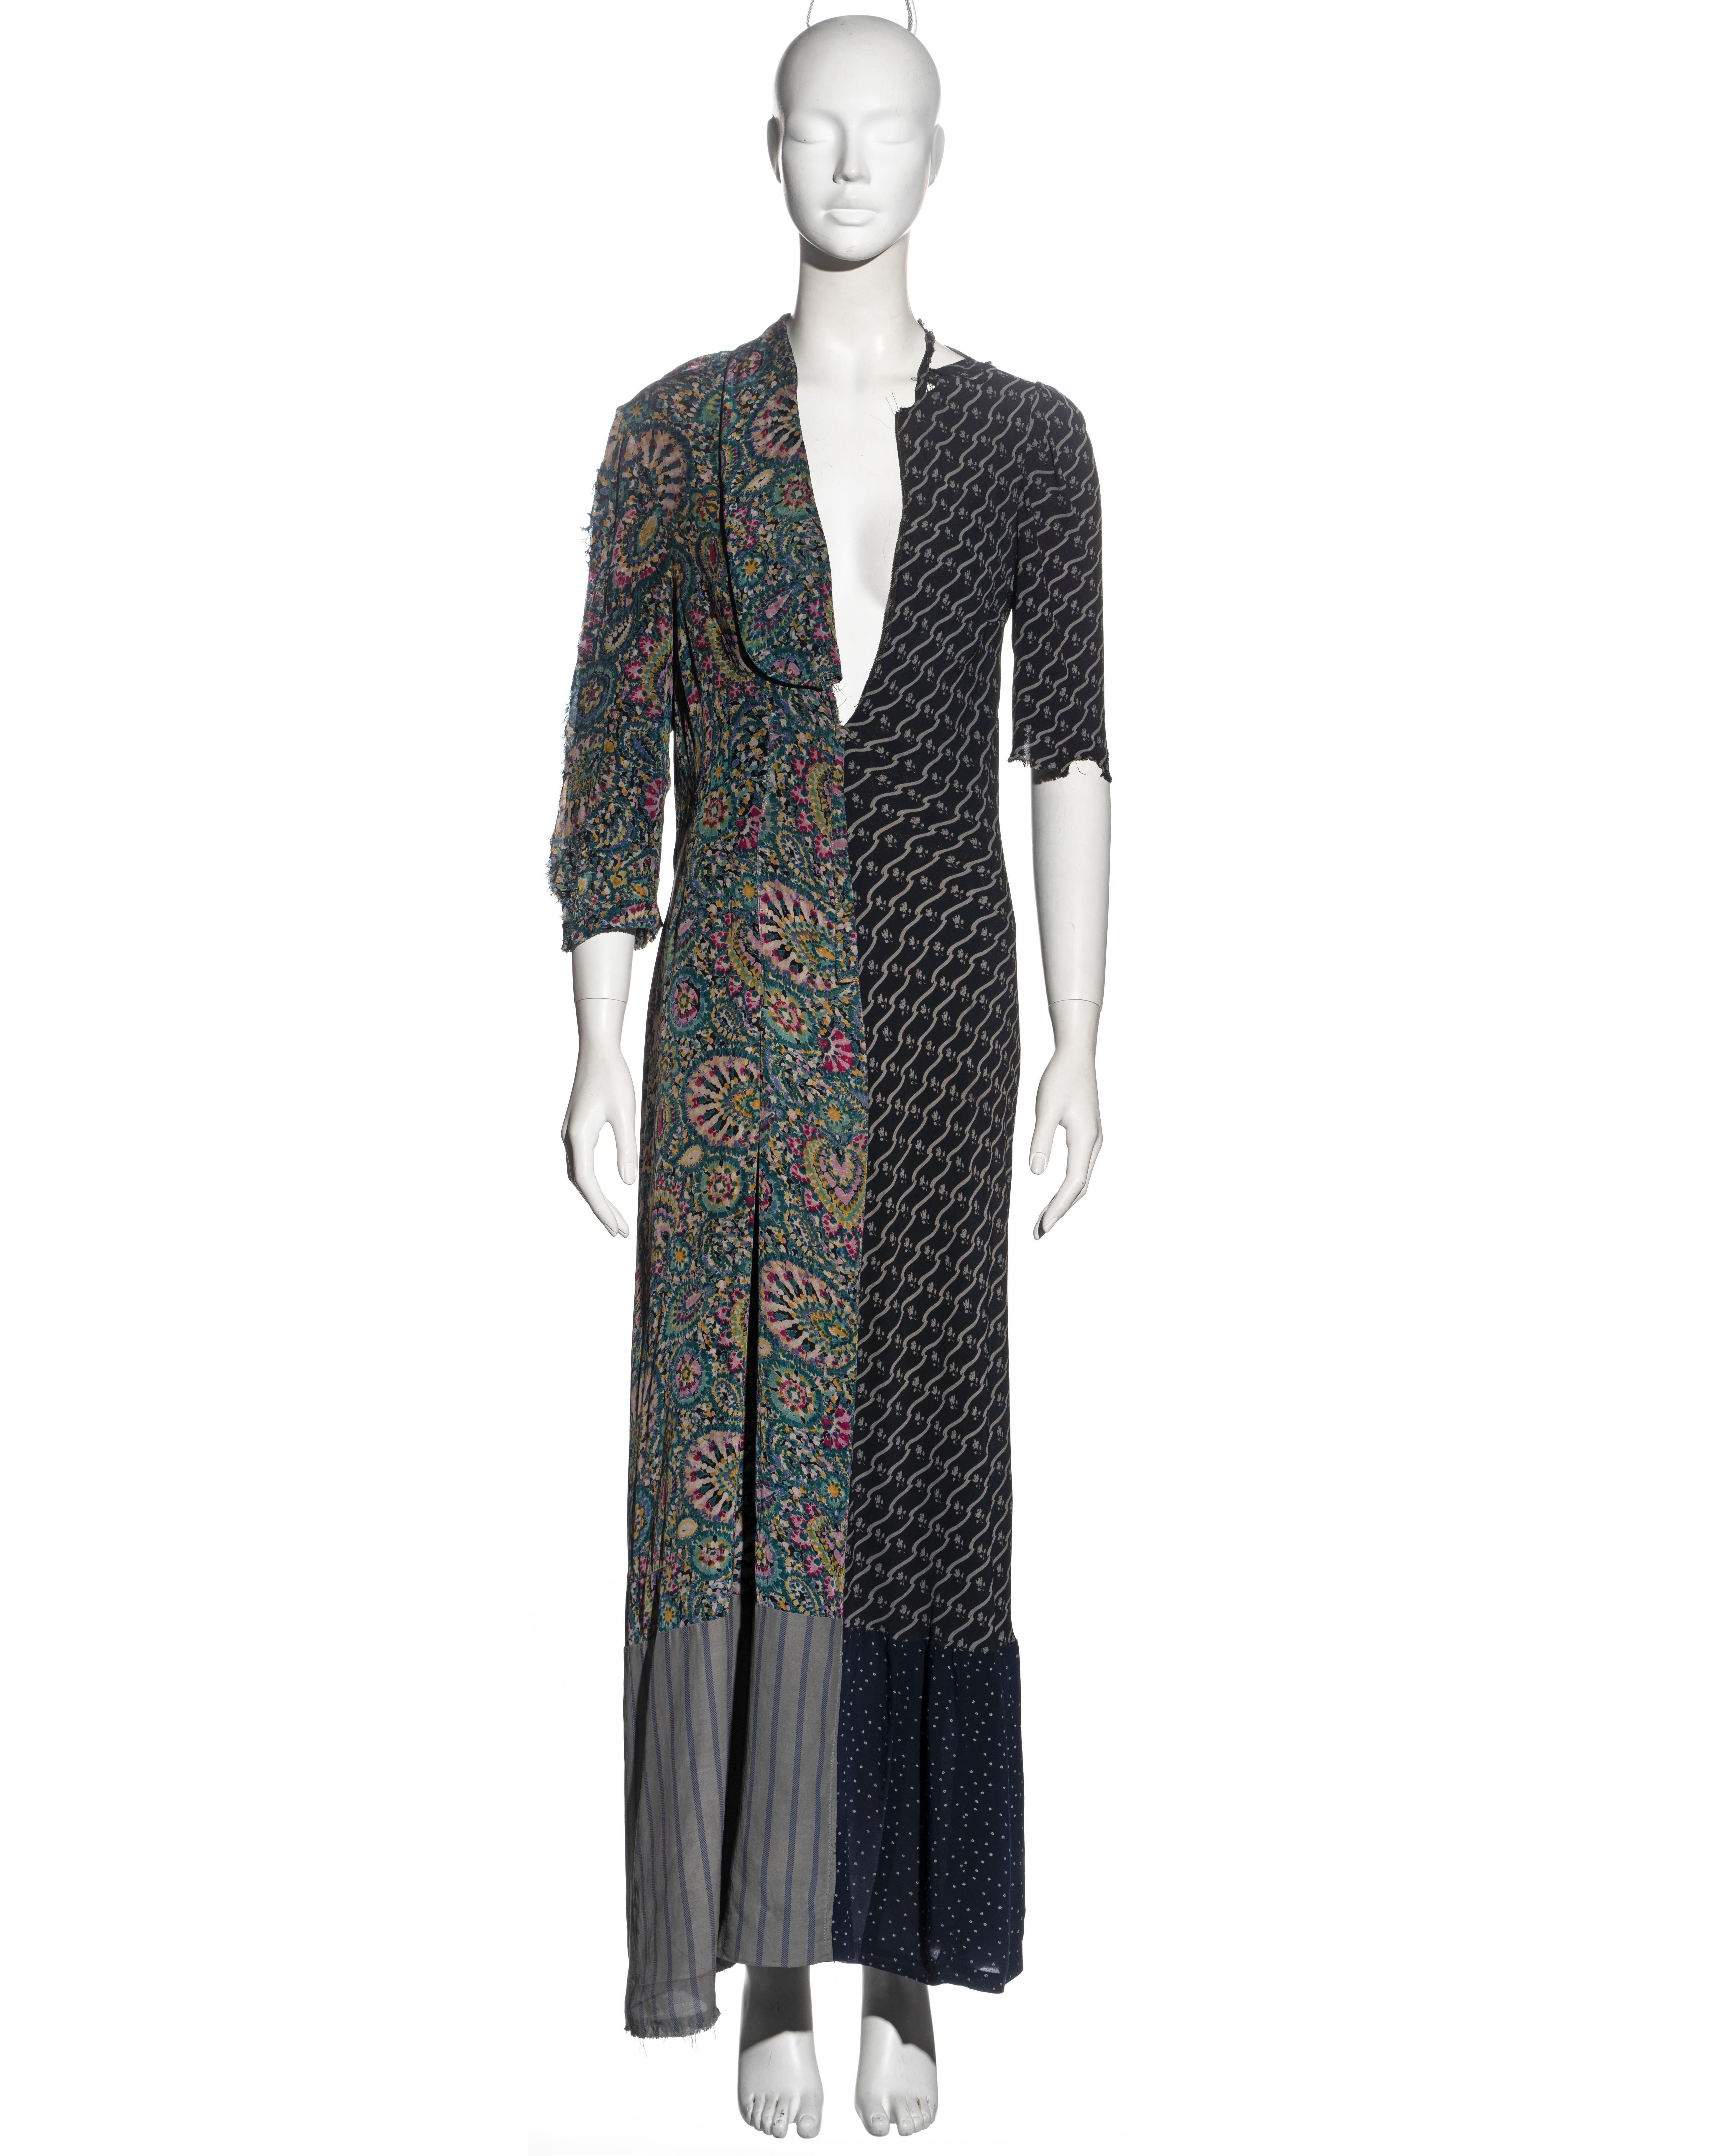 ▪ Rare Martin Margiela artisanal maxi dress
▪ Made from a patchwork of damaged 1940s dresses sourced by the designer at the flea markets in Paris
▪ Small - Medium
▪ Fall-Winter 1993
▪ Made in France